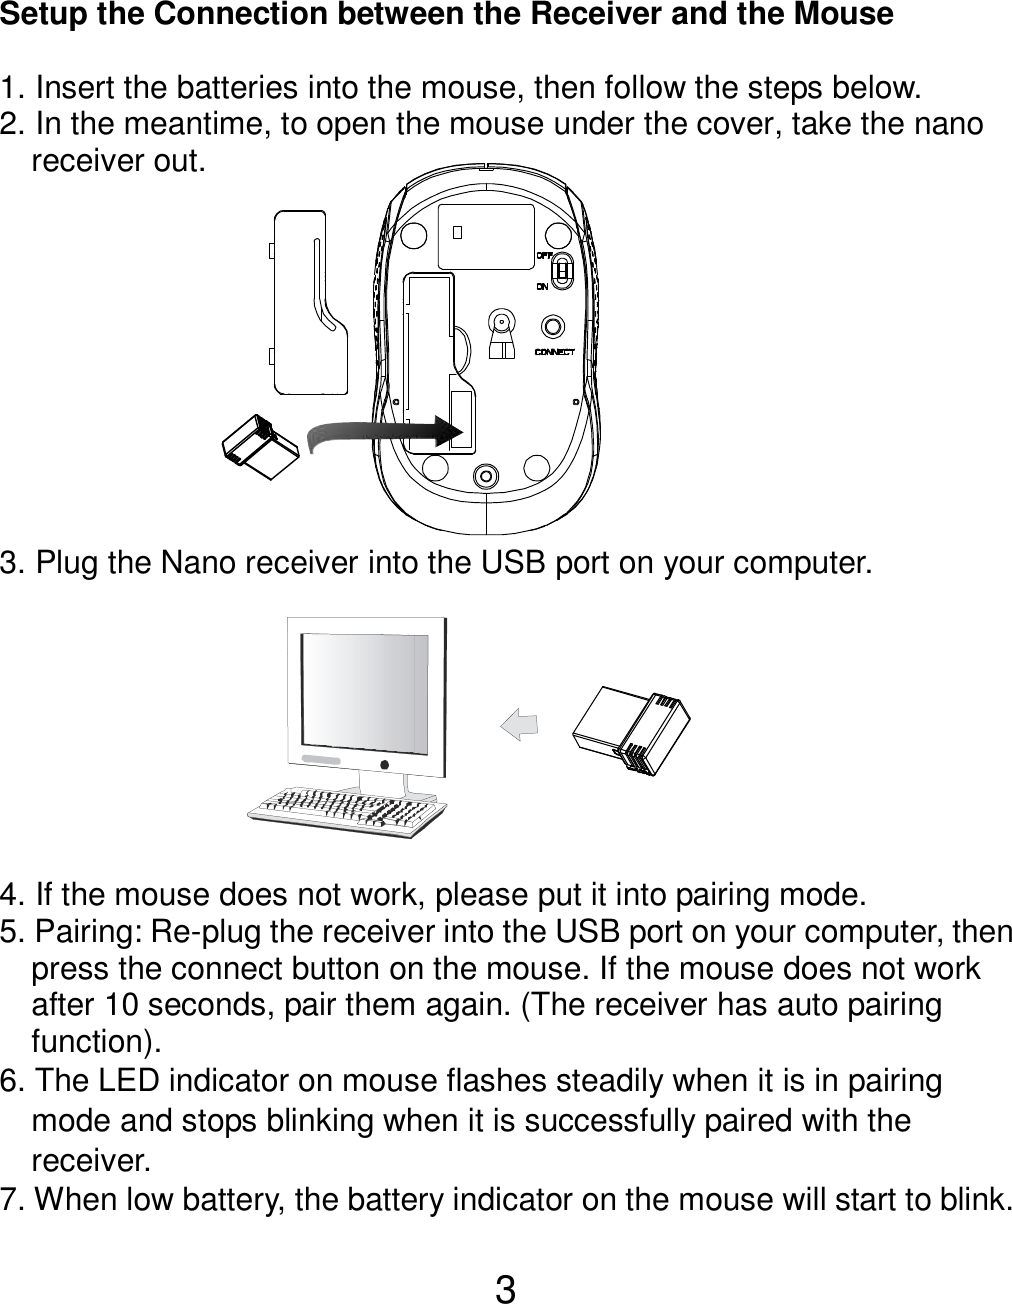  3  Setup the Connection between the Receiver and the Mouse  1. Insert the batteries into the mouse, then follow the steps below. 2. In the meantime, to open the mouse under the cover, take the nano       receiver out.           3. Plug the Nano receiver into the USB port on your computer.         4. If the mouse does not work, please put it into pairing mode. 5. Pairing: Re-plug the receiver into the USB port on your computer, then press the connect button on the mouse. If the mouse does not work after 10 seconds, pair them again. (The receiver has auto pairing function). 6. The LED indicator on mouse flashes steadily when it is in pairing     mode and stops blinking when it is successfully paired with the     receiver.   7. When low battery, the battery indicator on the mouse will start to blink.  